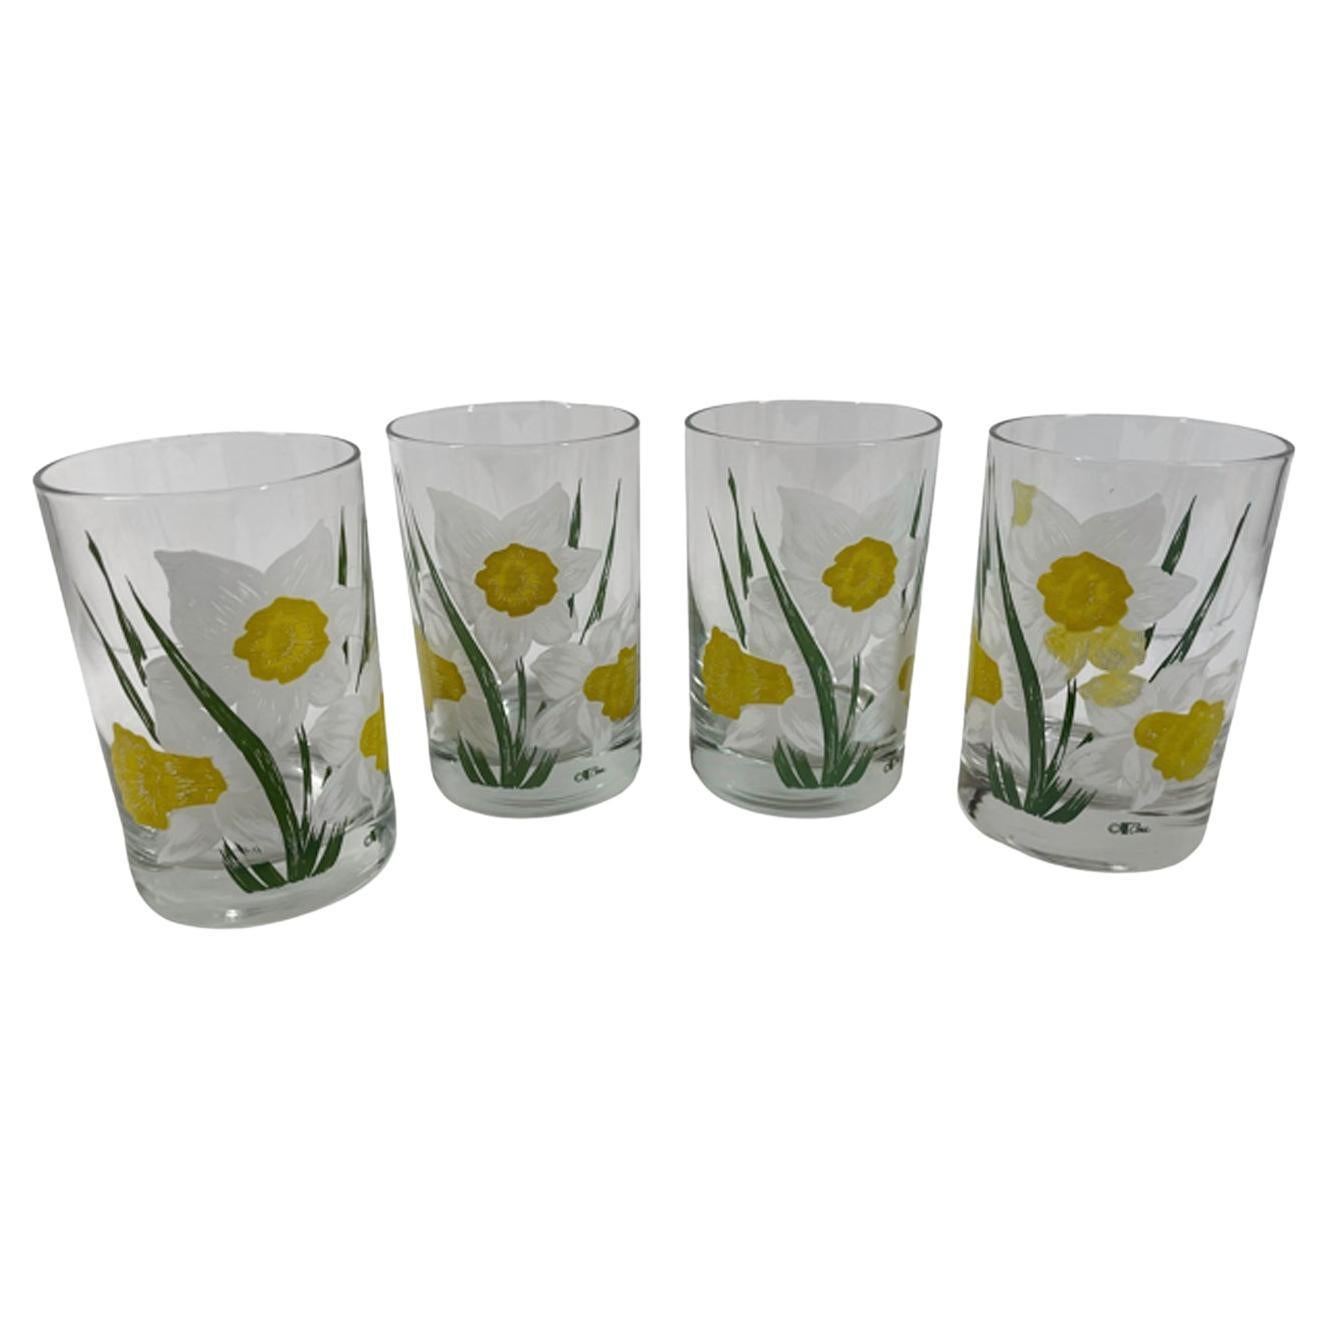 Four Cera Glass Vintage Rocks Glasses with Large Daffodils in Colored Enamels